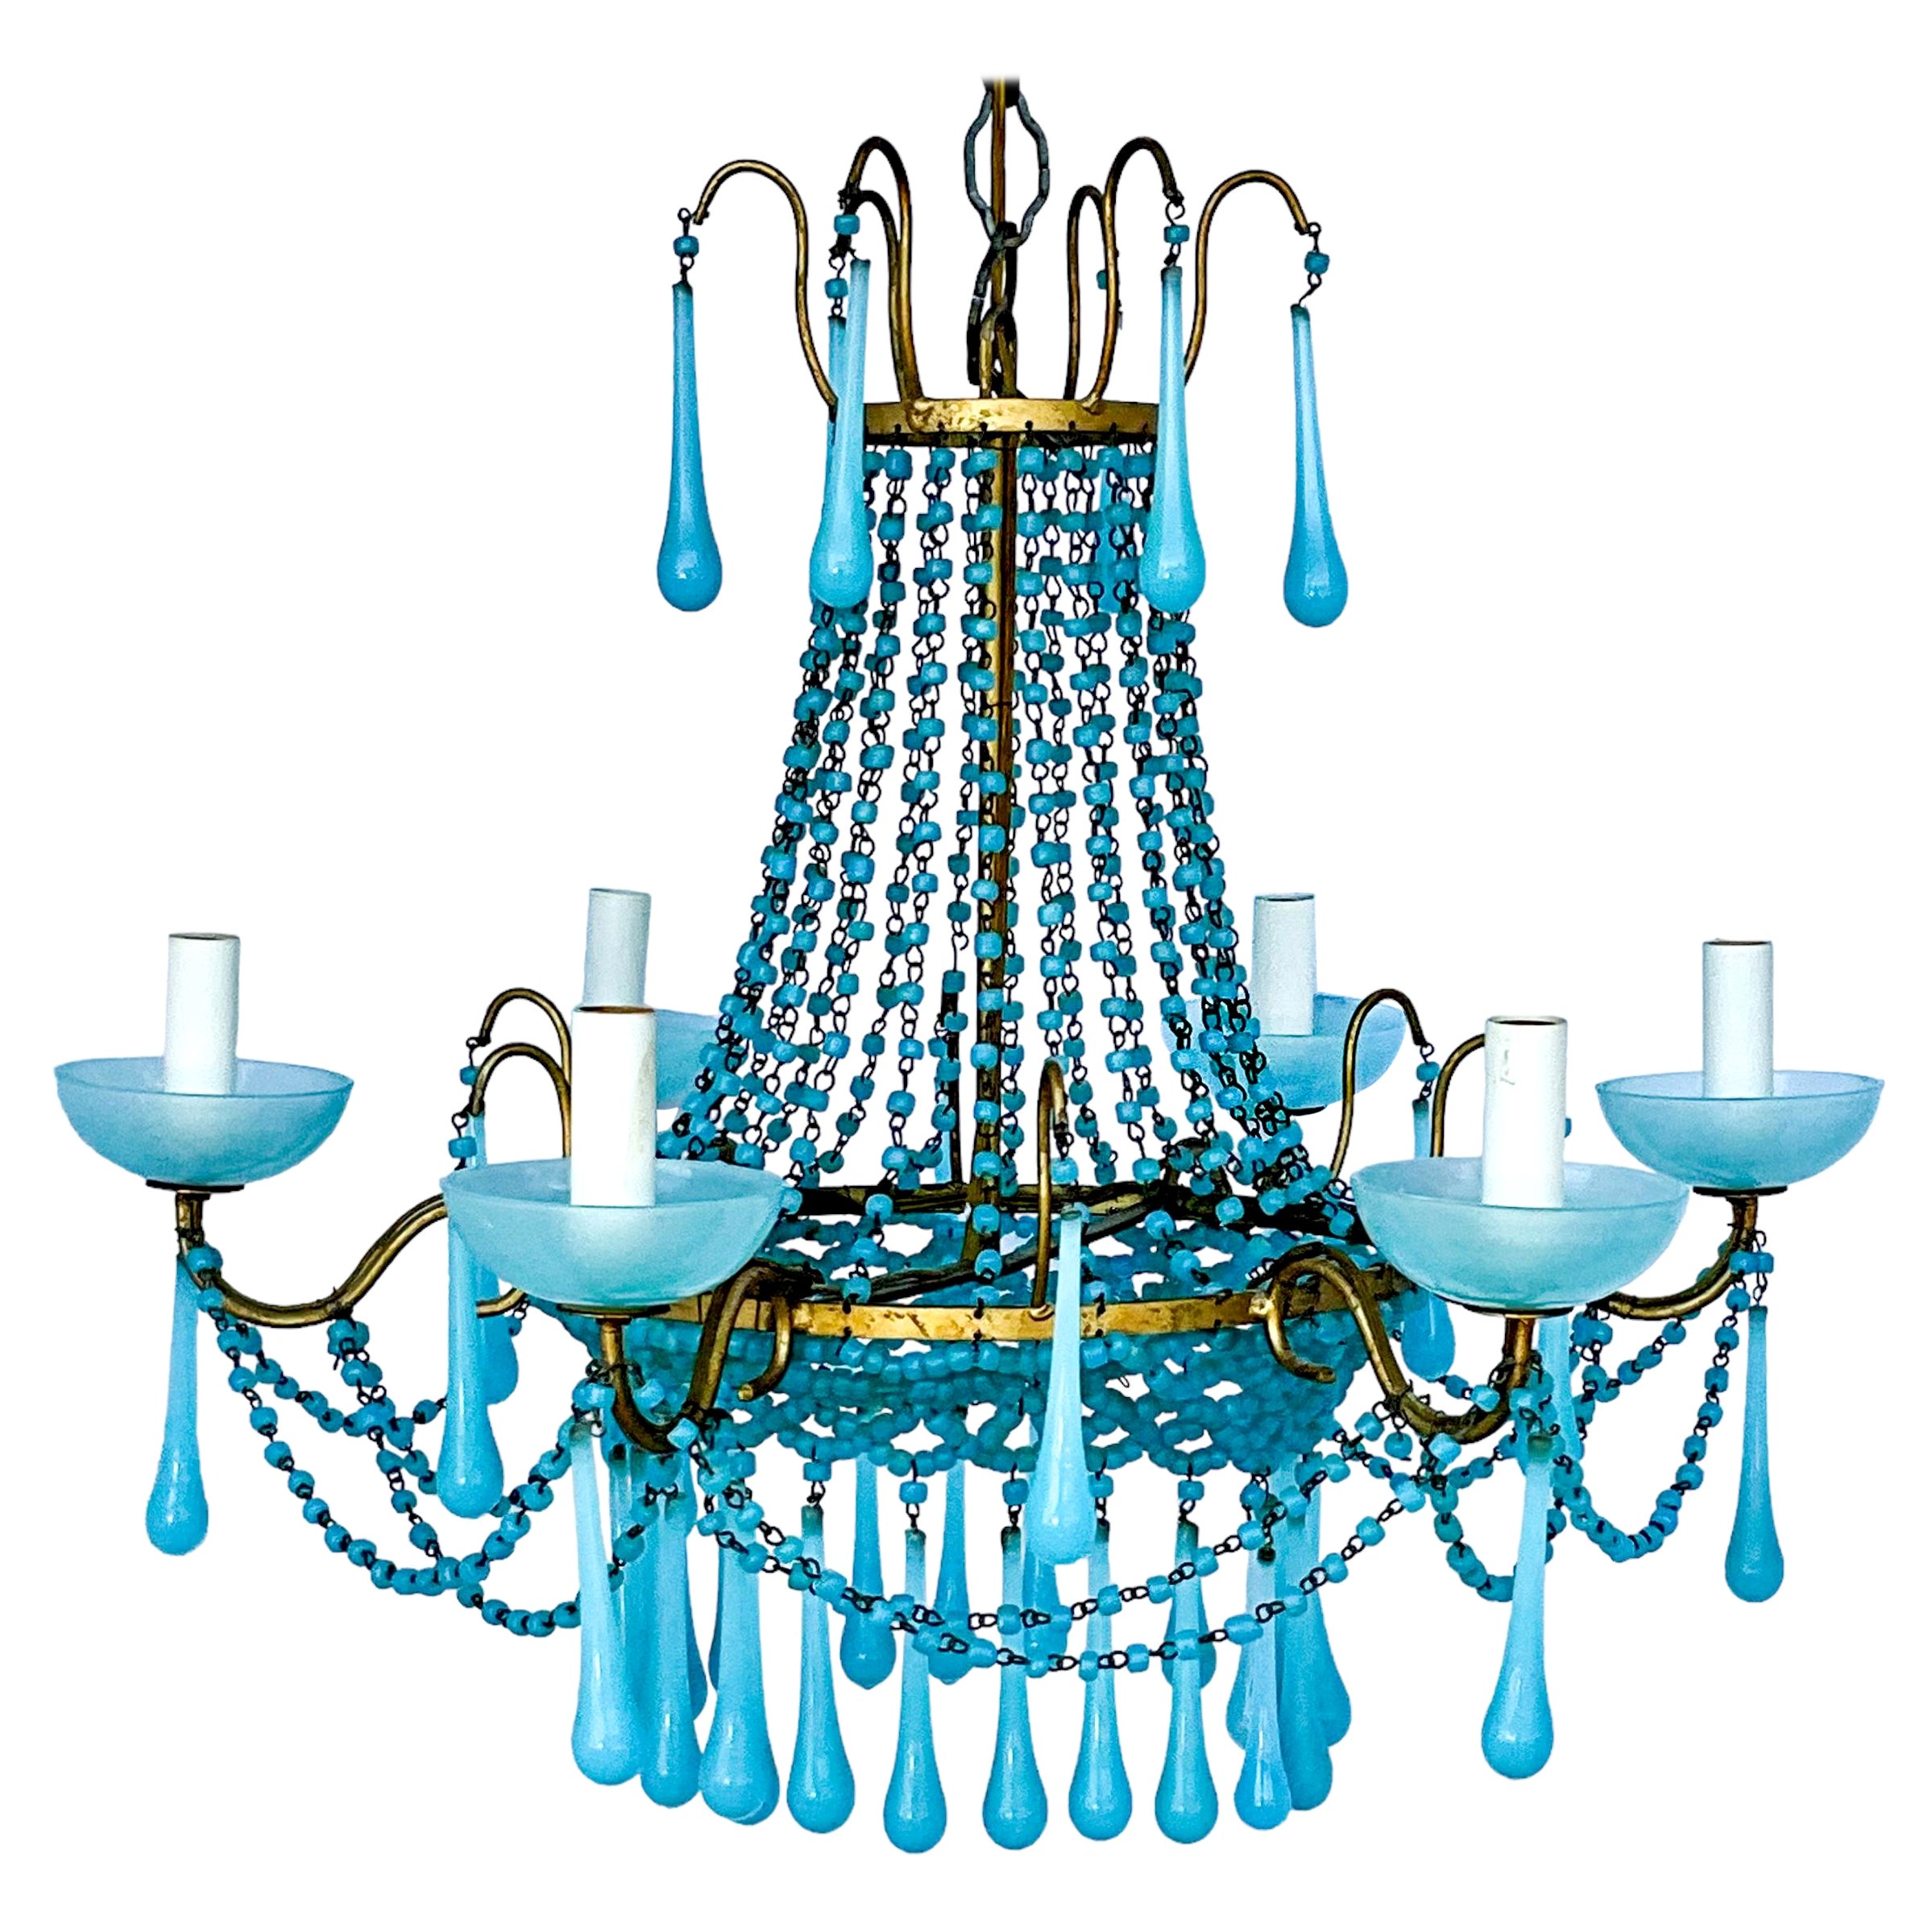 Late 20th Century Italian Turquoise Crystal & Gilt Metal Chandelier - 6 Arm  For Sale